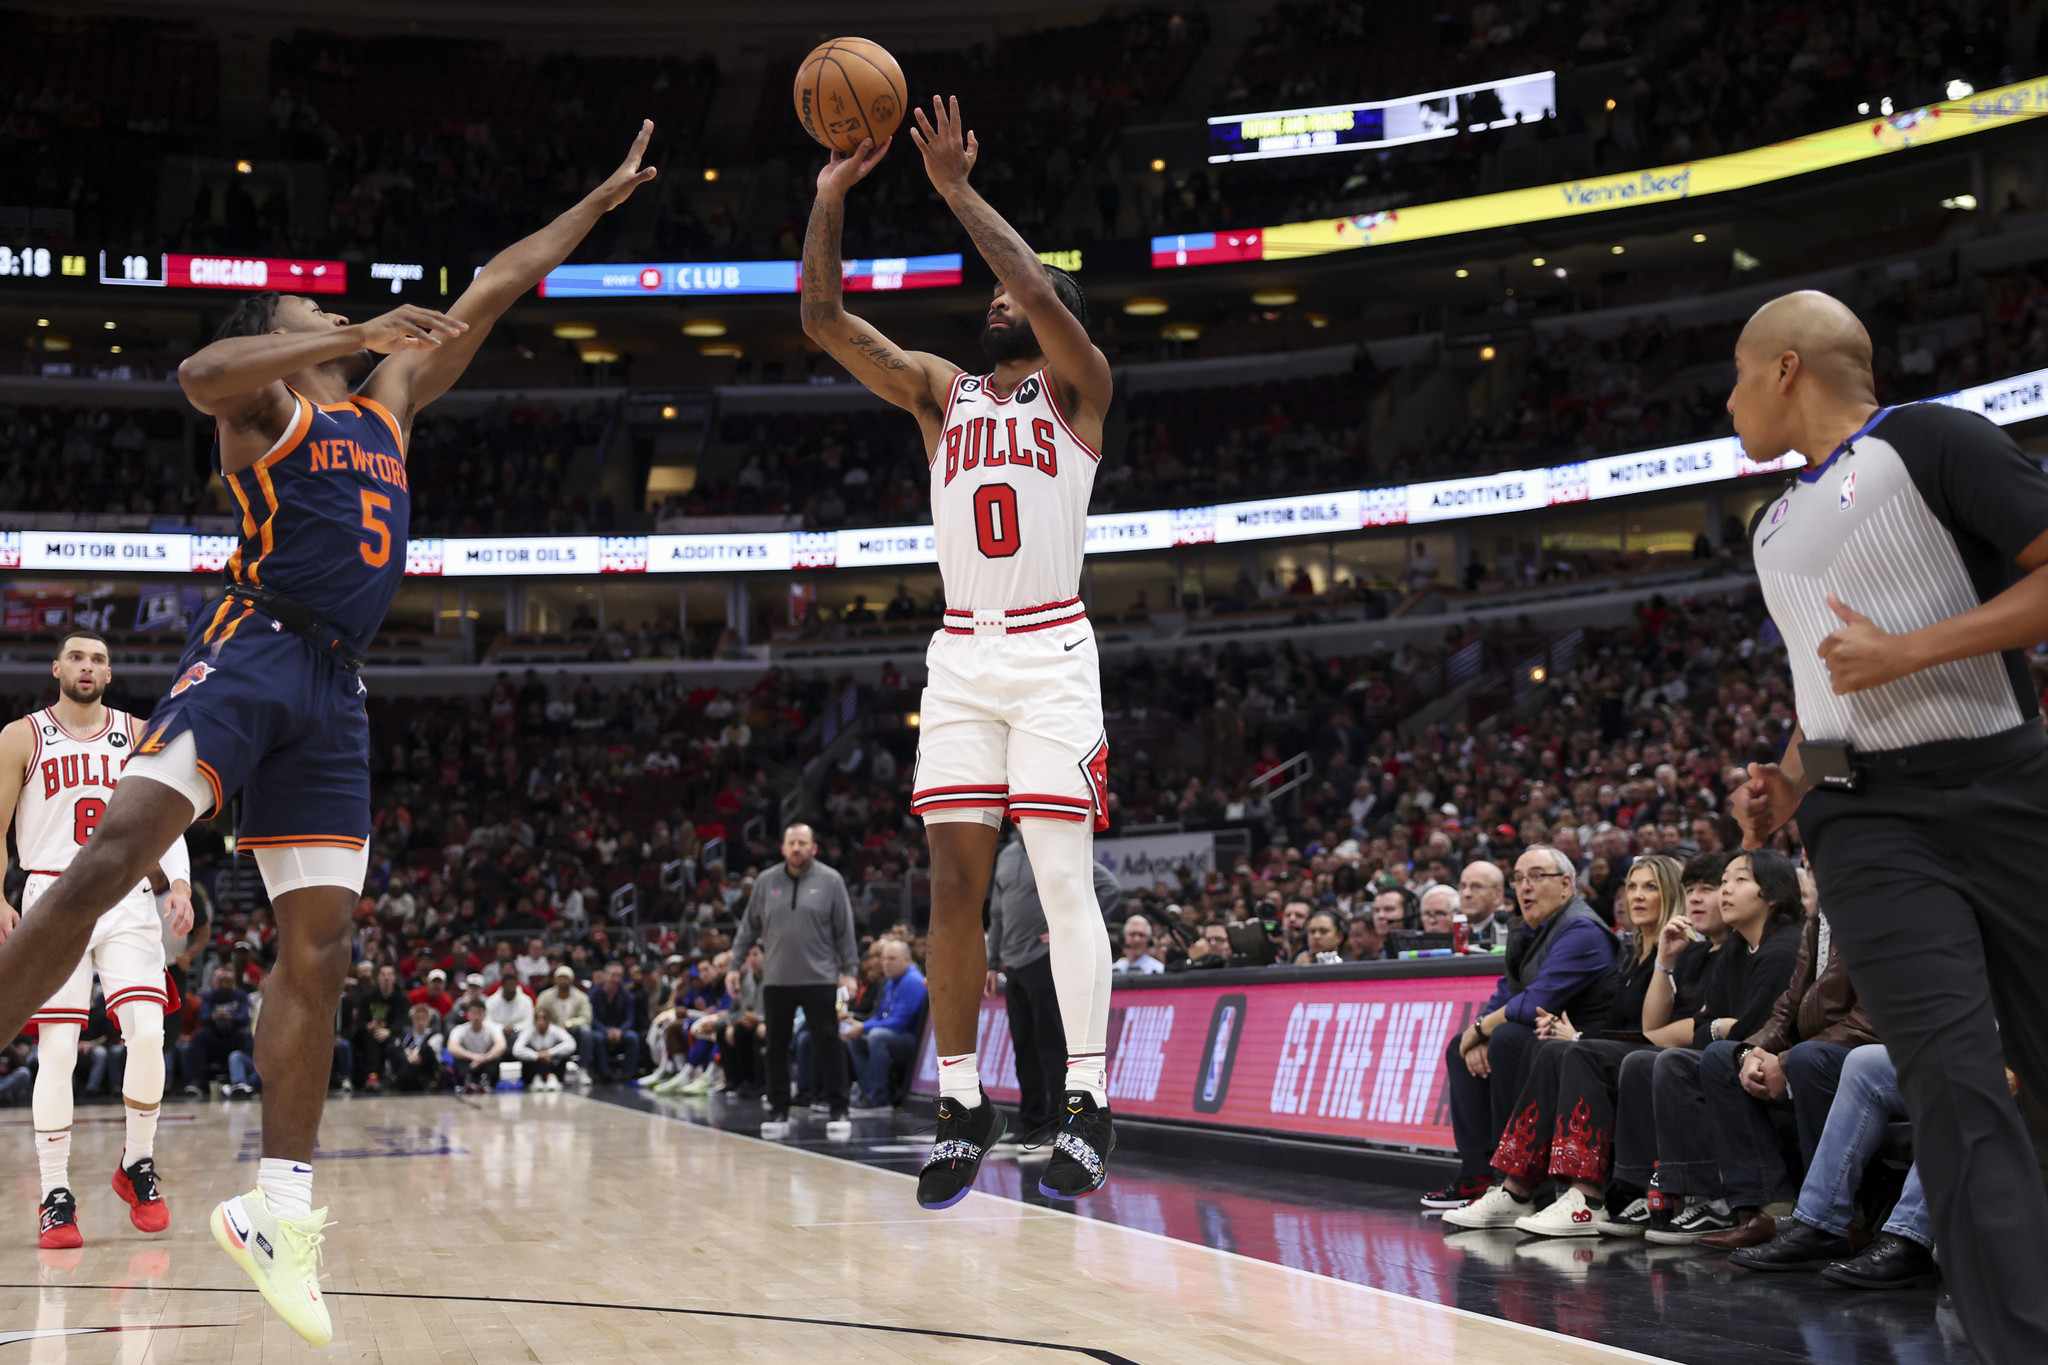 Chicago Bulls' DeMar DeRozan scores over New York Knicks' Jalen Brunson  during the second half of an NBA basketball game Wednesday, Dec. 14, 2022,  in Chicago. The Knicks won in overtime 128-120. (